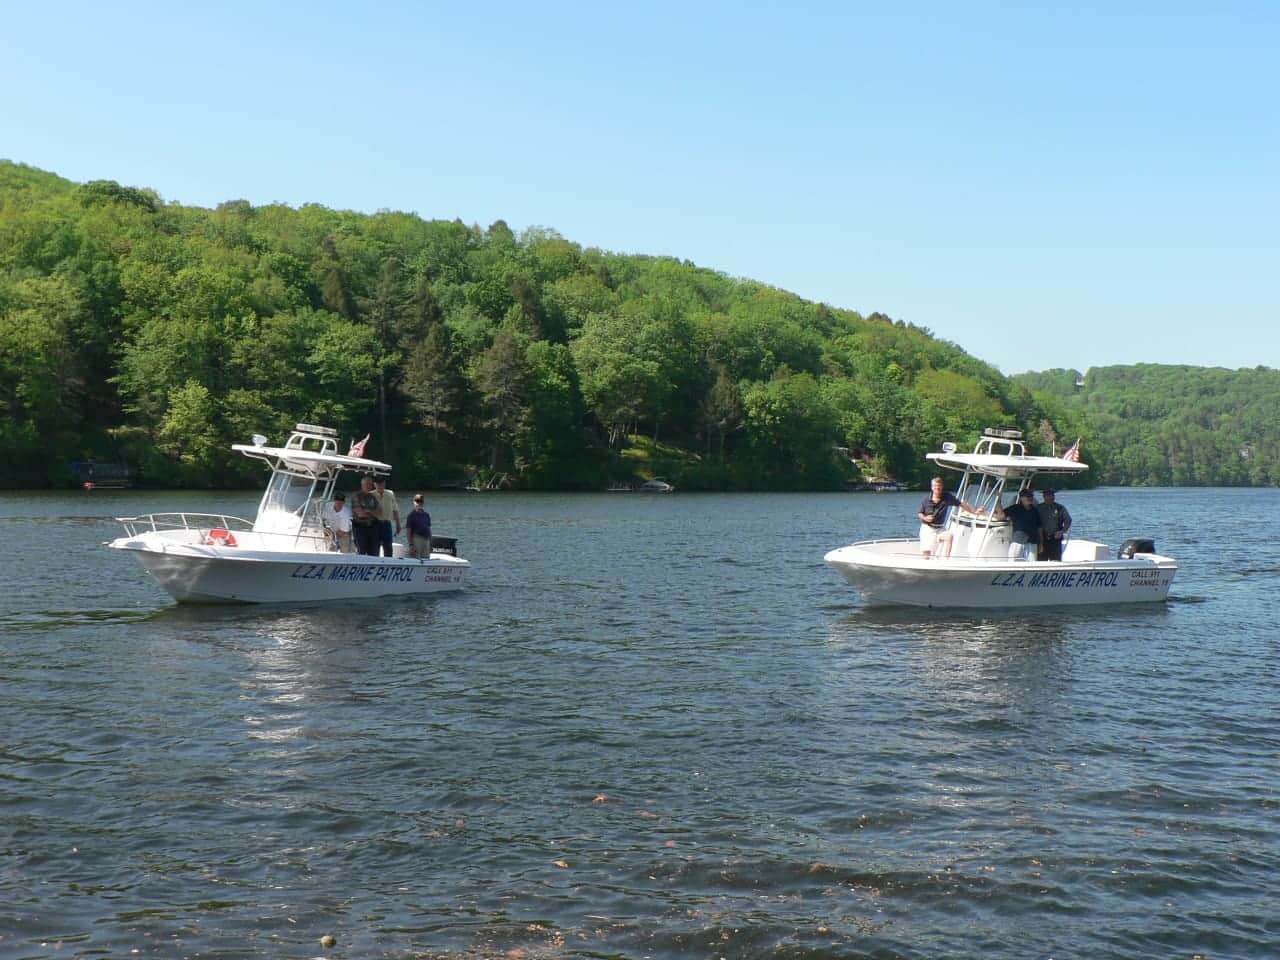 Two police boats patrol Lake Zoar. The growth of algae in the water depends on the summer weather.